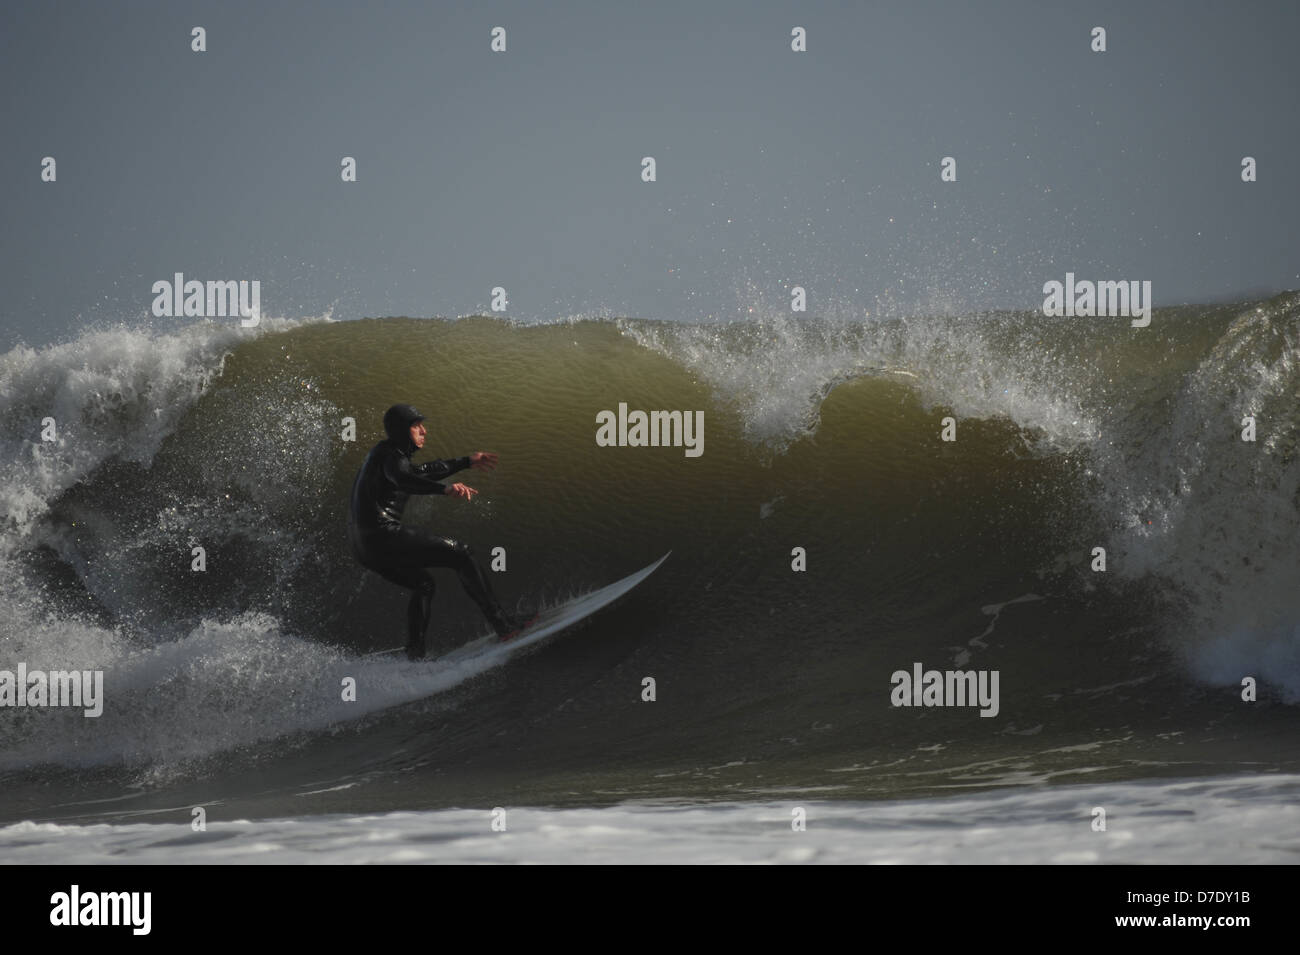 A curling wave threatens to engulf a surfer as he speeds across the face.  Surfing on Gower, Wales, UK Stock Photo